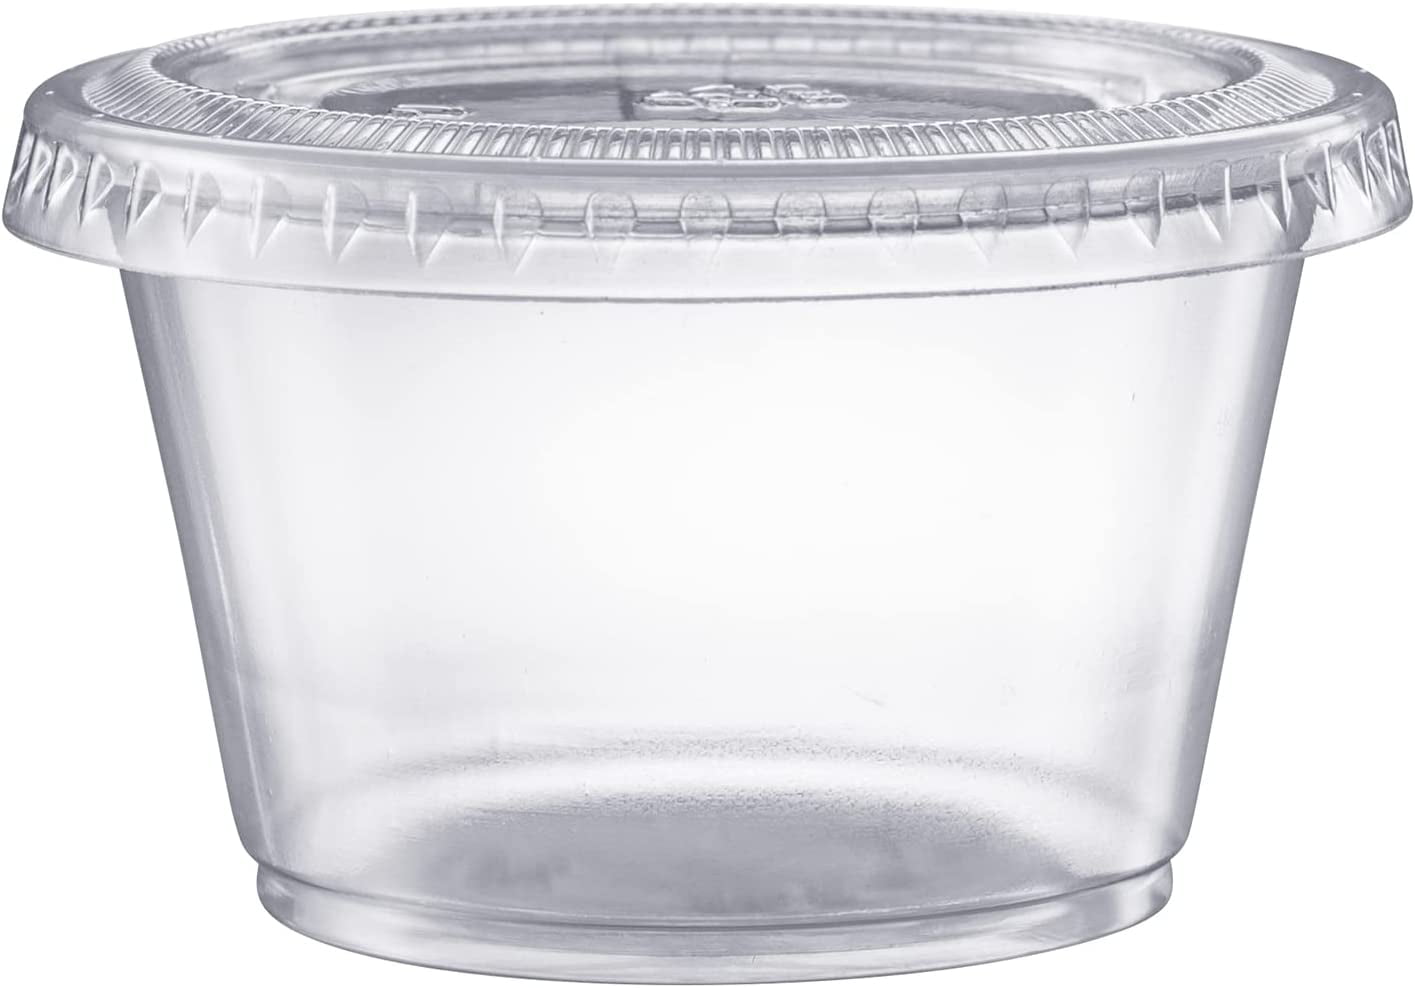 915 Generation 100 Pieces Small Plastic Containers with Lids, 25Ml